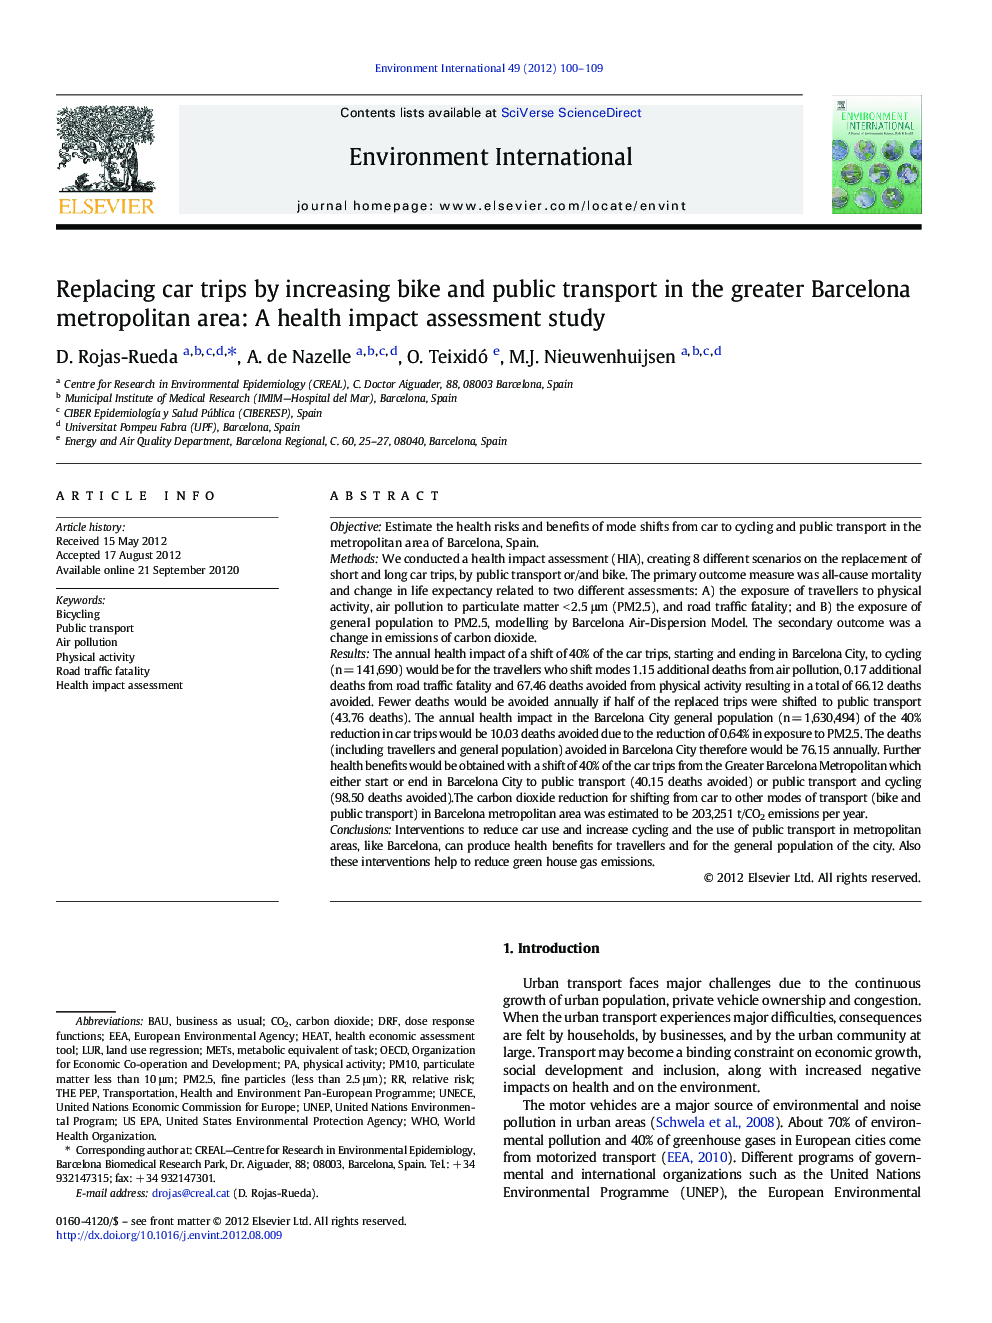 Replacing car trips by increasing bike and public transport in the greater Barcelona metropolitan area: A health impact assessment study